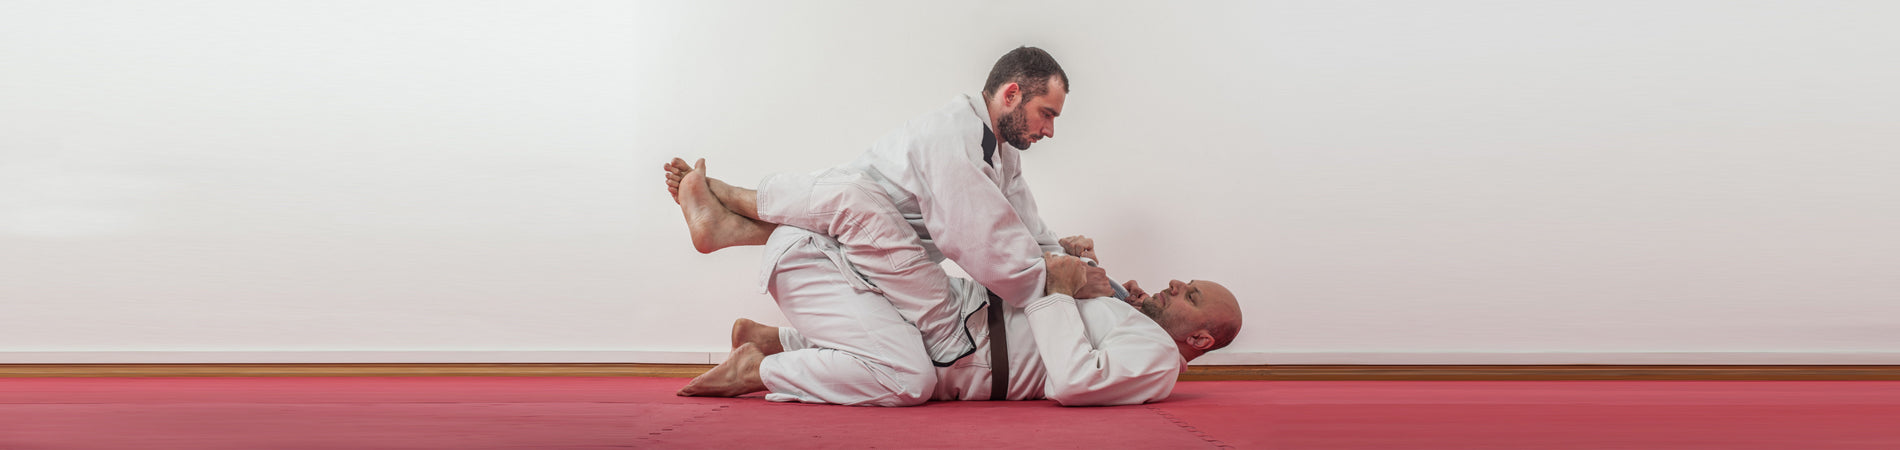 Questions You Should be Asking to Your BJJ Instructor During a Class